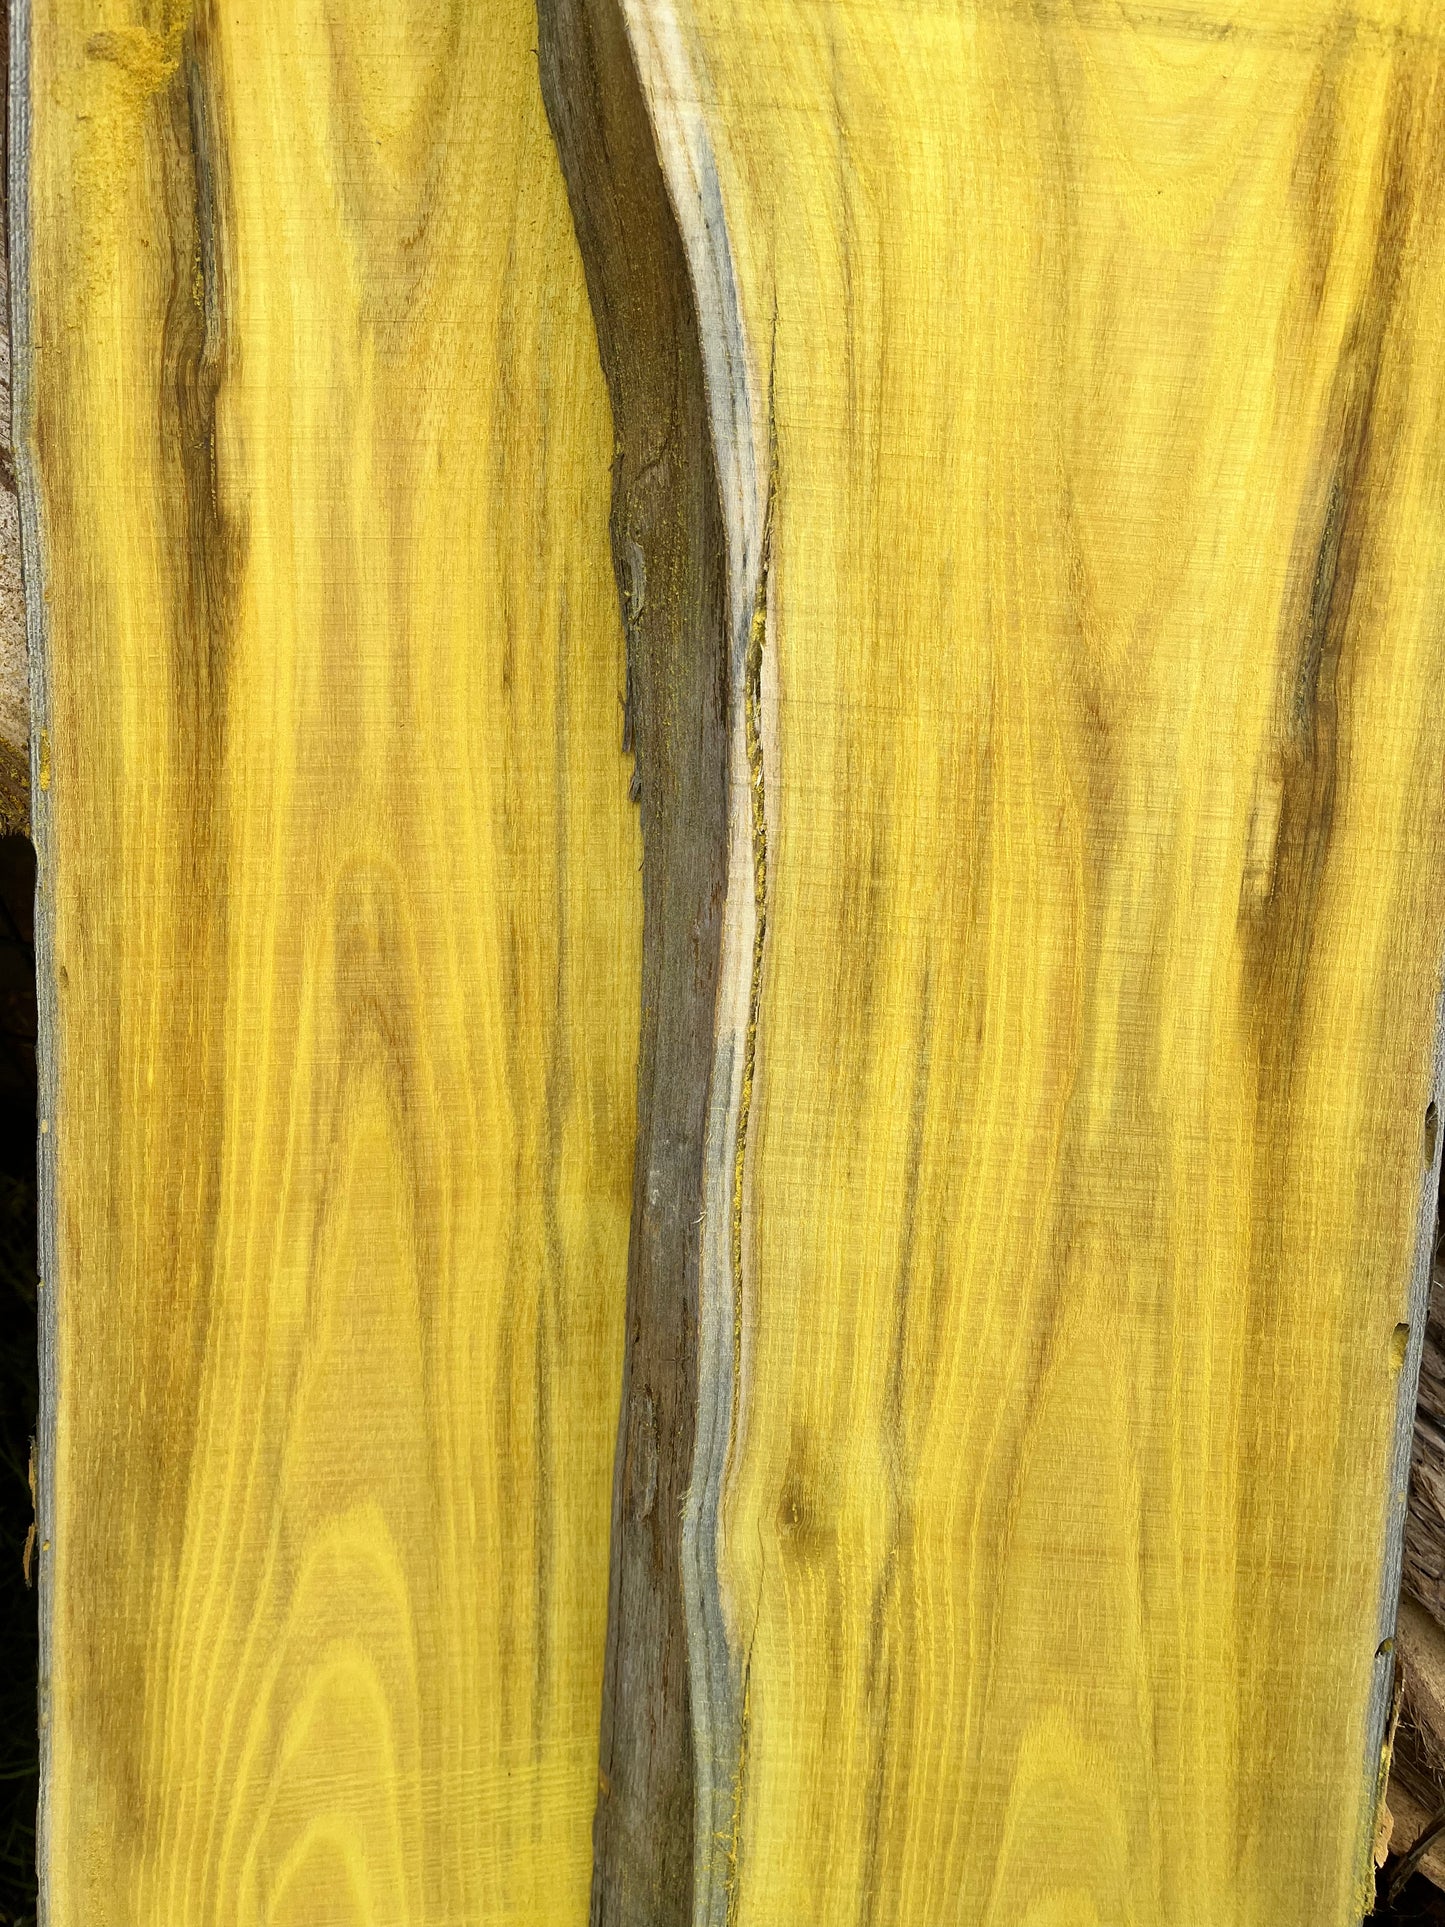 2" Thick Rough Cut Osage Orange (Bois d'Arc) Live Edge Slabs for Charcuterie Boards, Furniture, Table and Bar Tops, Shelves, and More - Kiln Dried